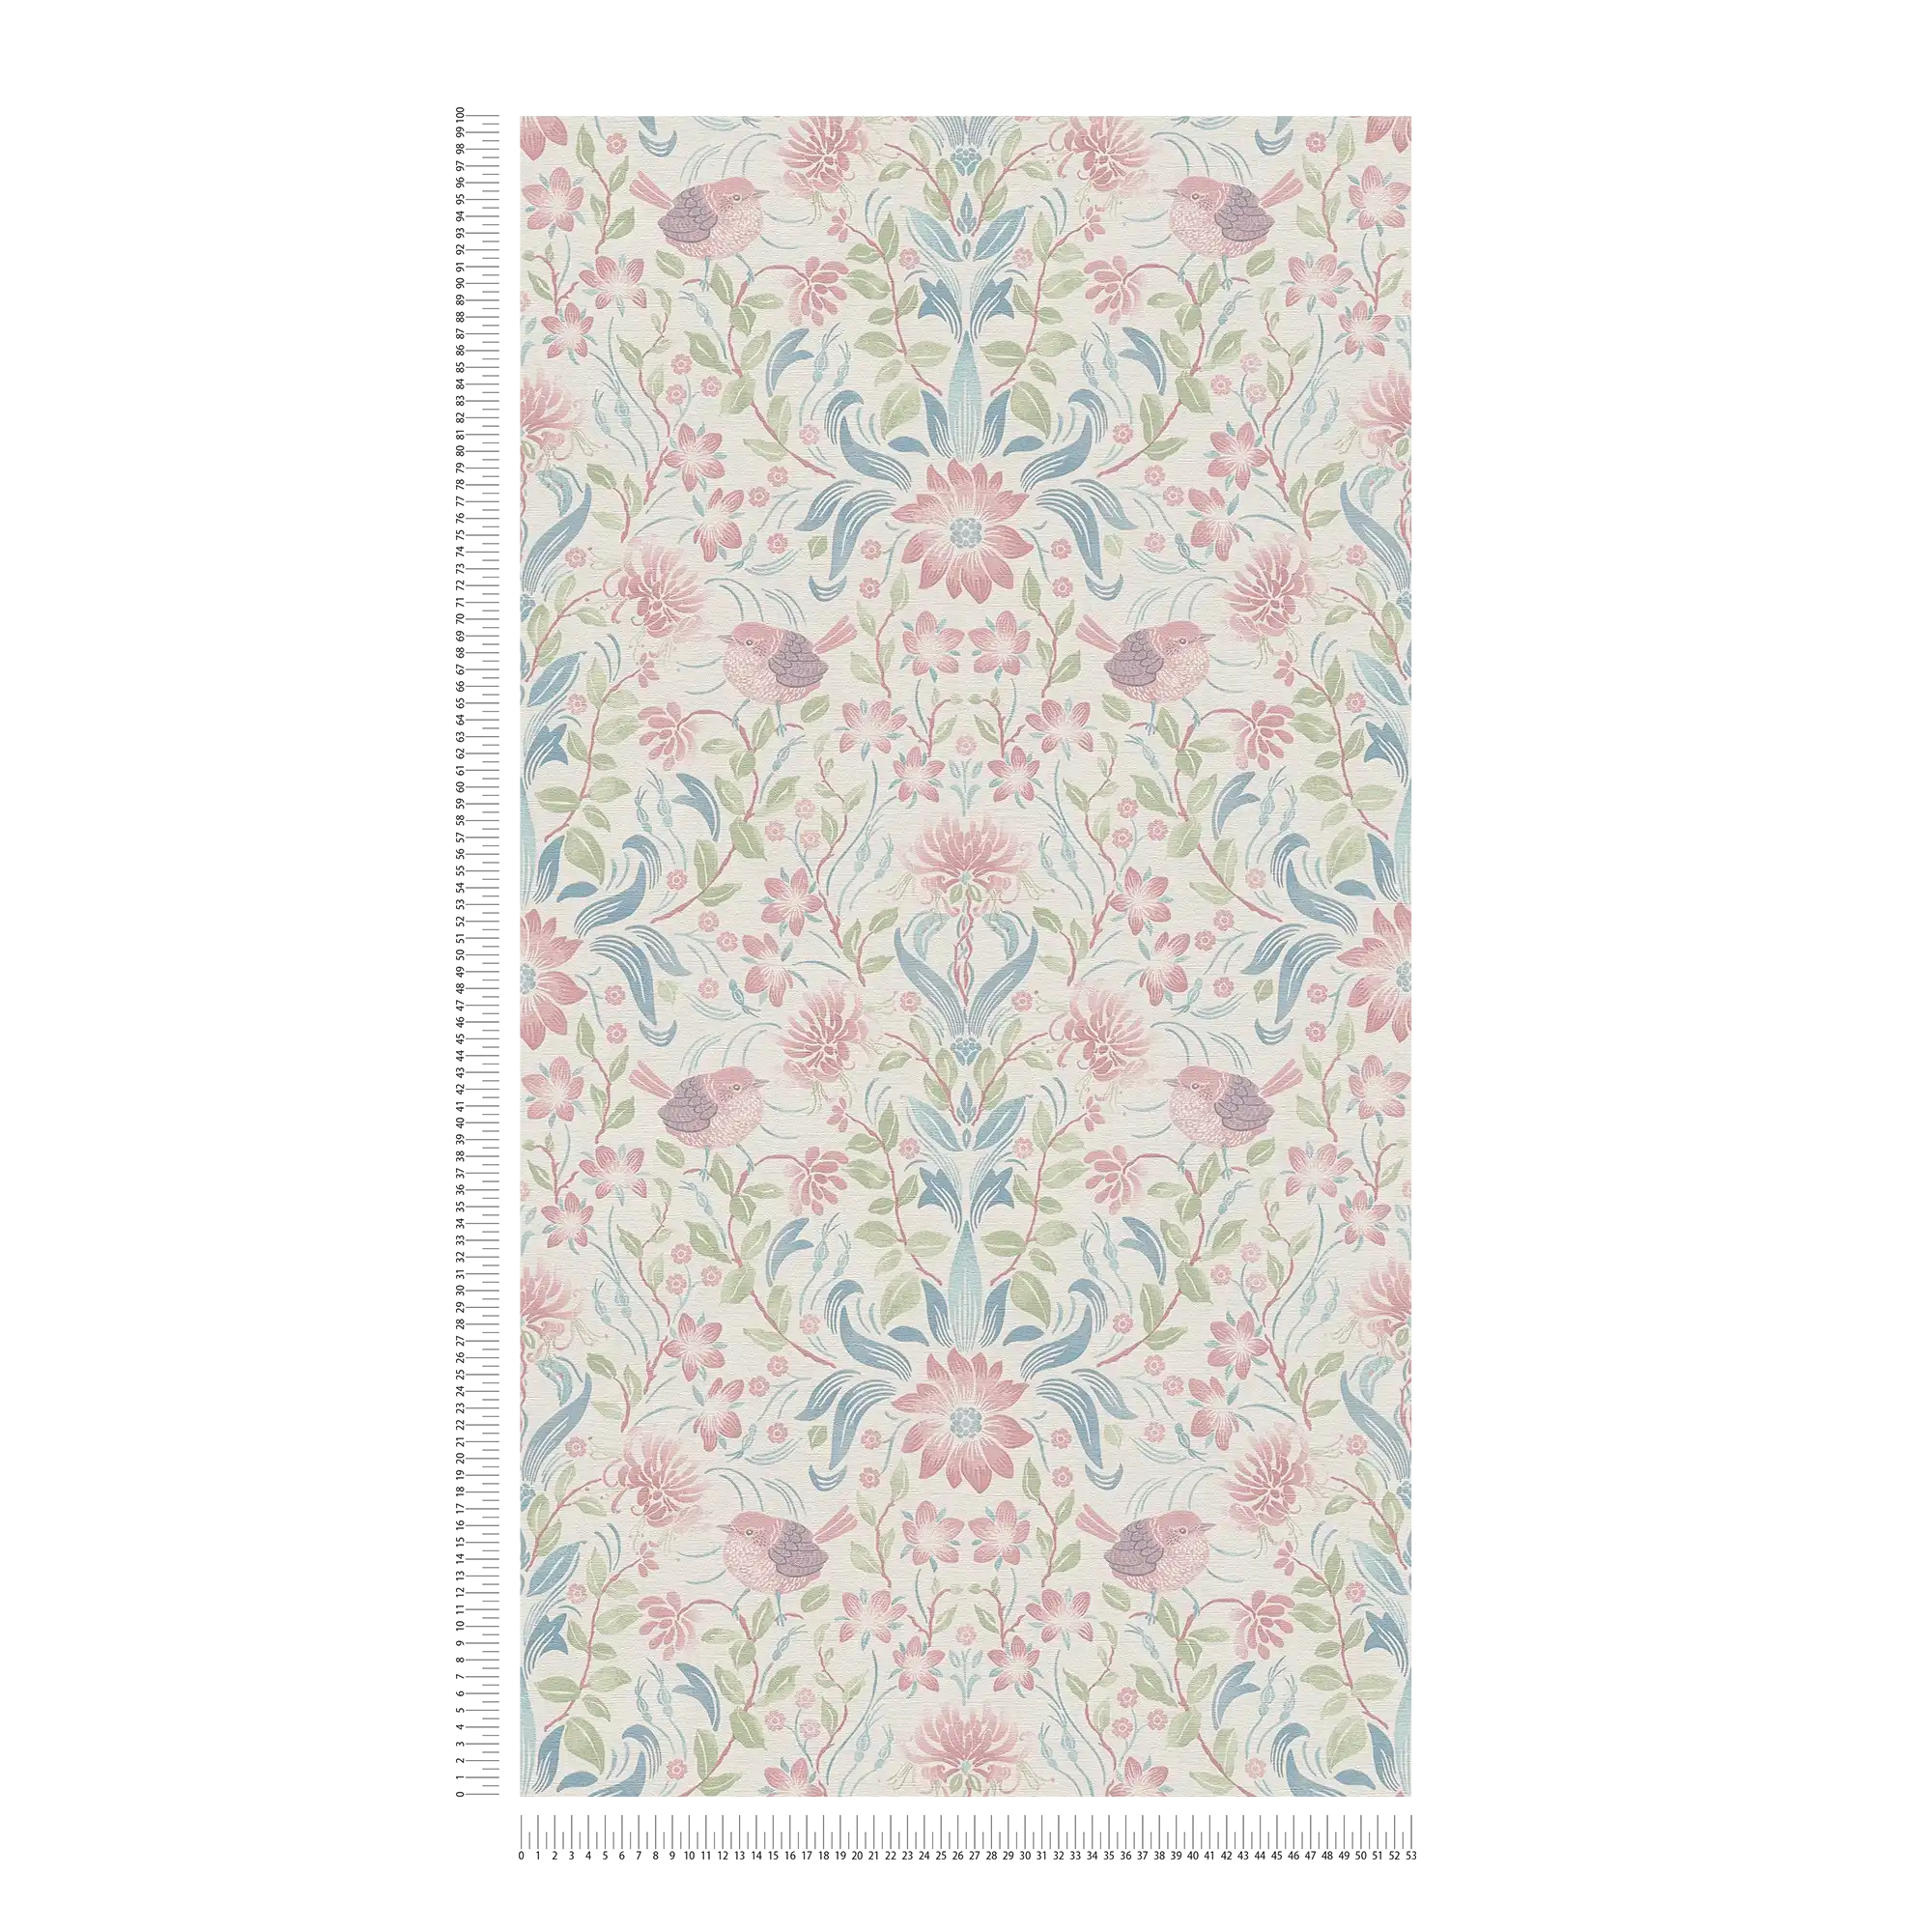             Floral pattern wallpaper with birds - cream, blue, pink
        